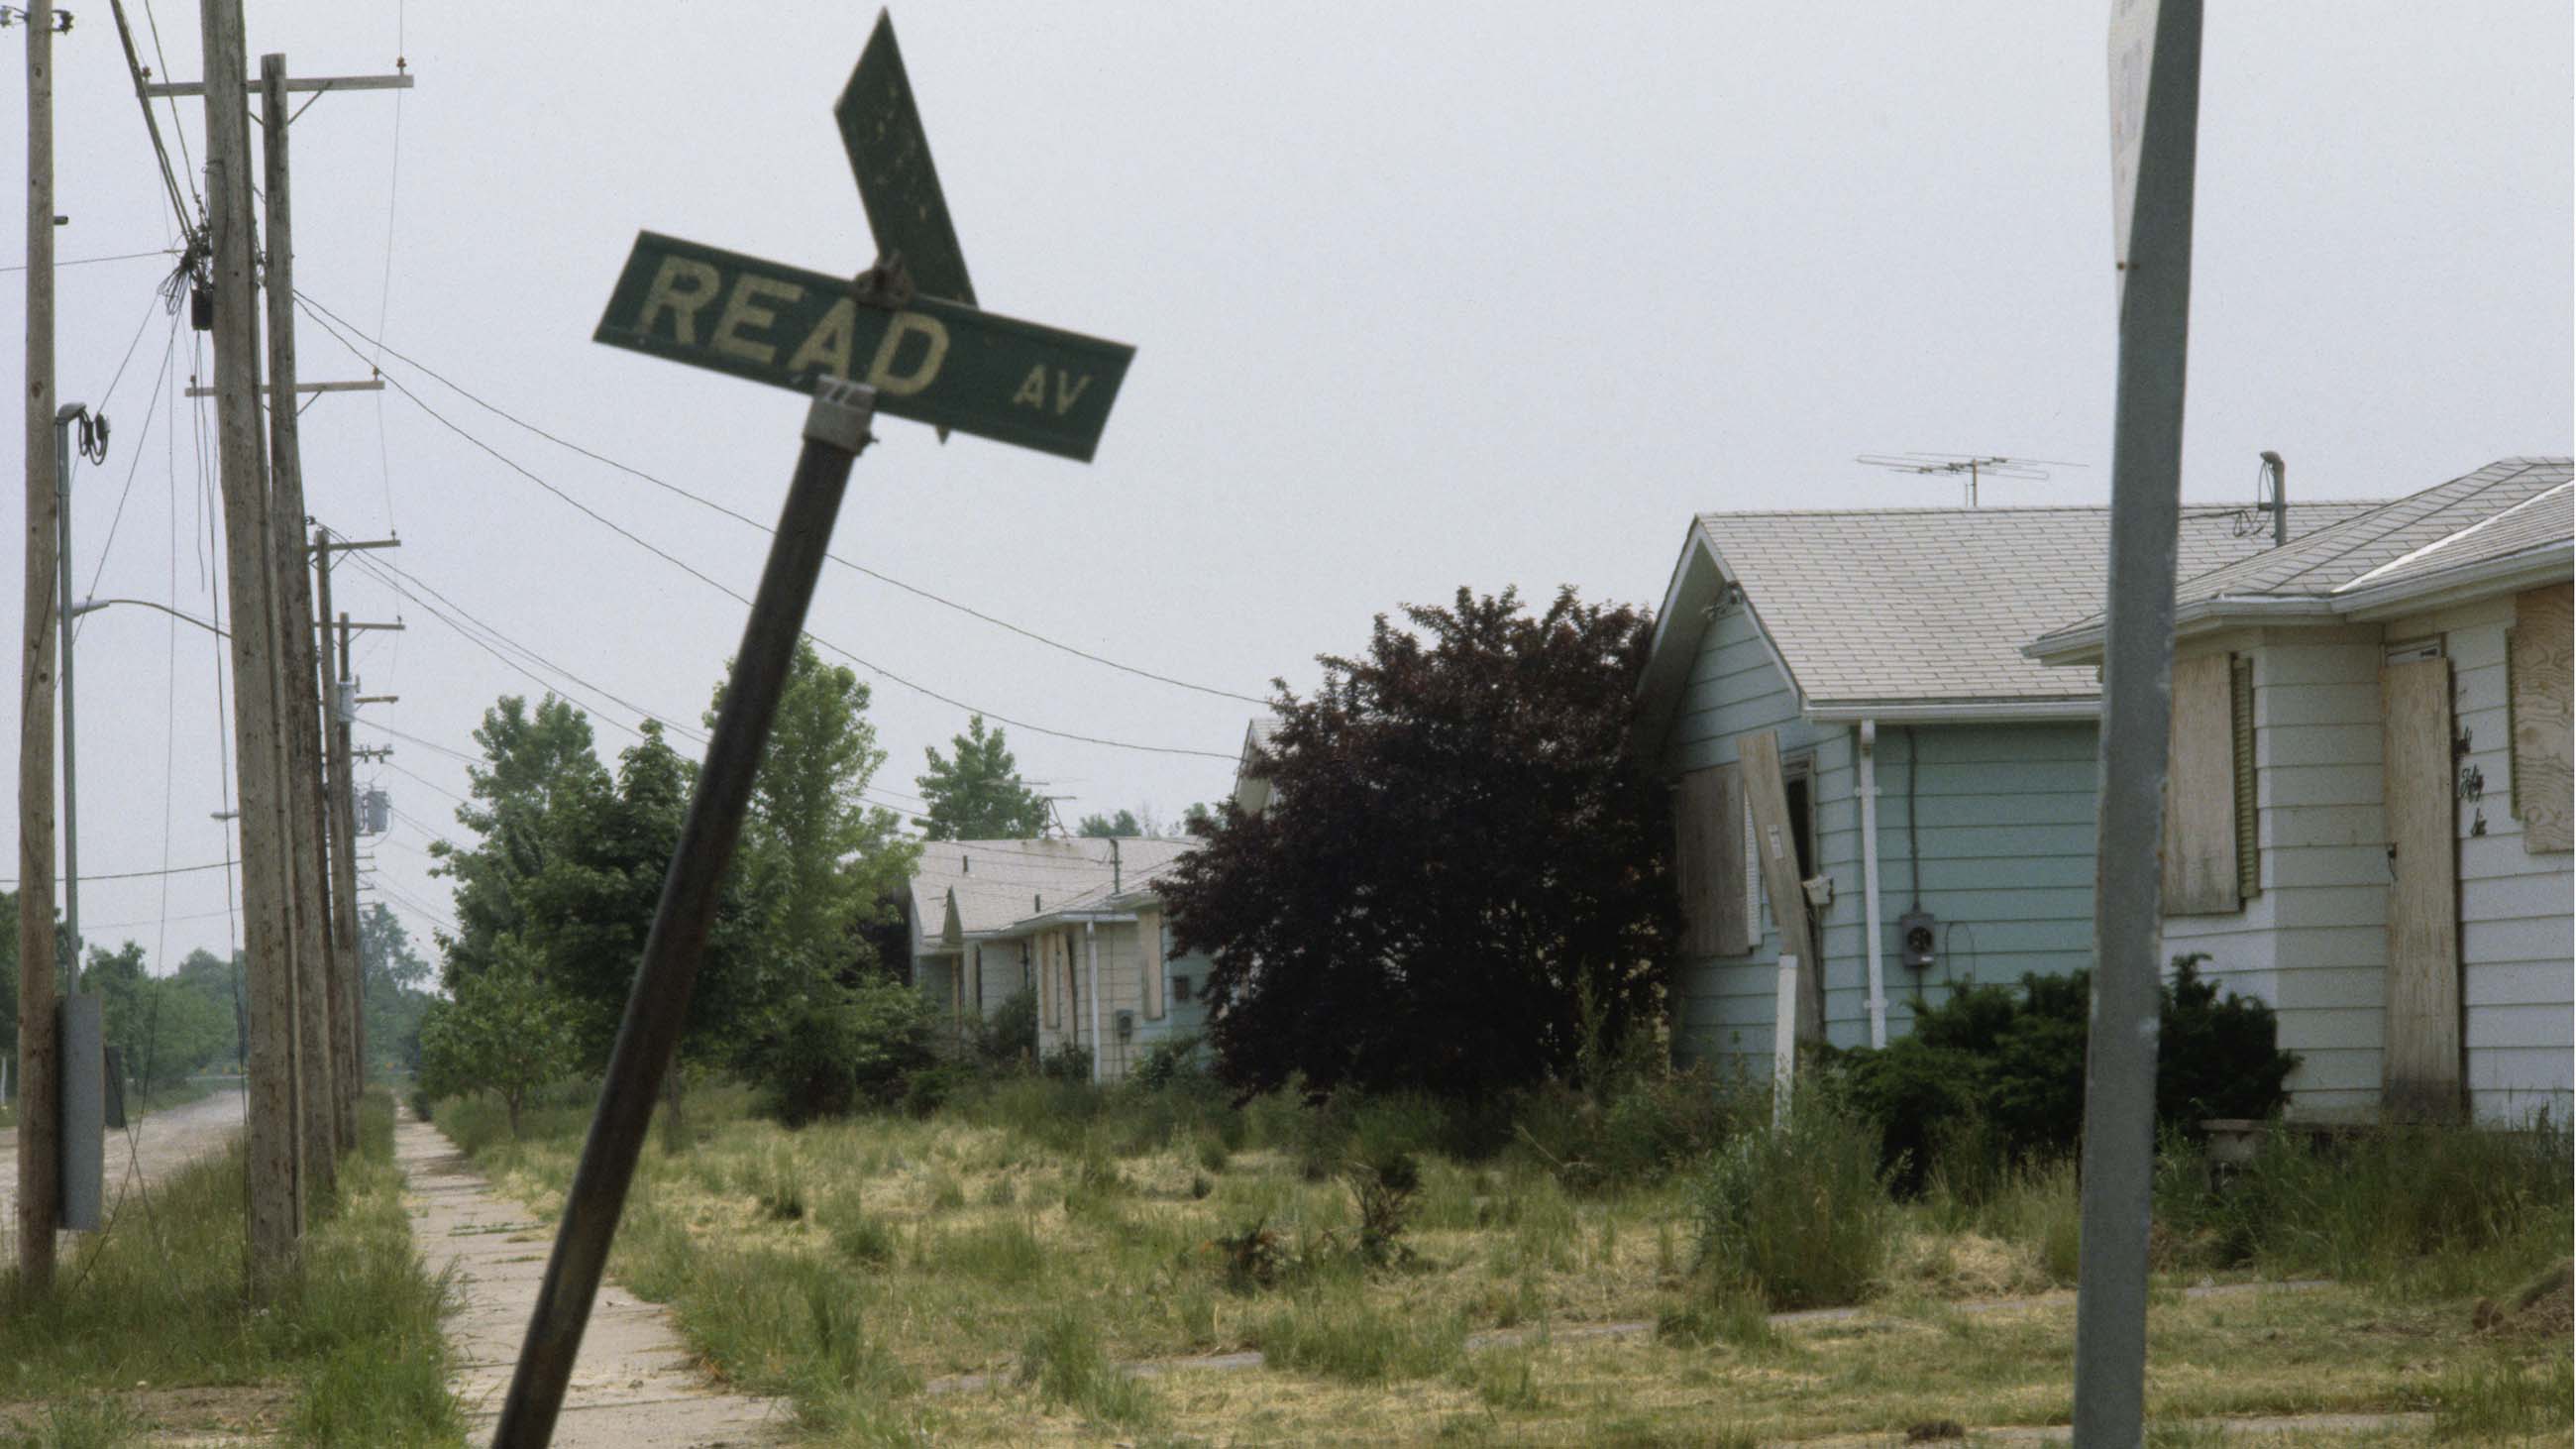 A derelict street, including boarded-up homes, weeds, and a damaged street sign, in the suburban Love Canal neighborhood of Niagara Falls, which was built over a toxic waste dump.